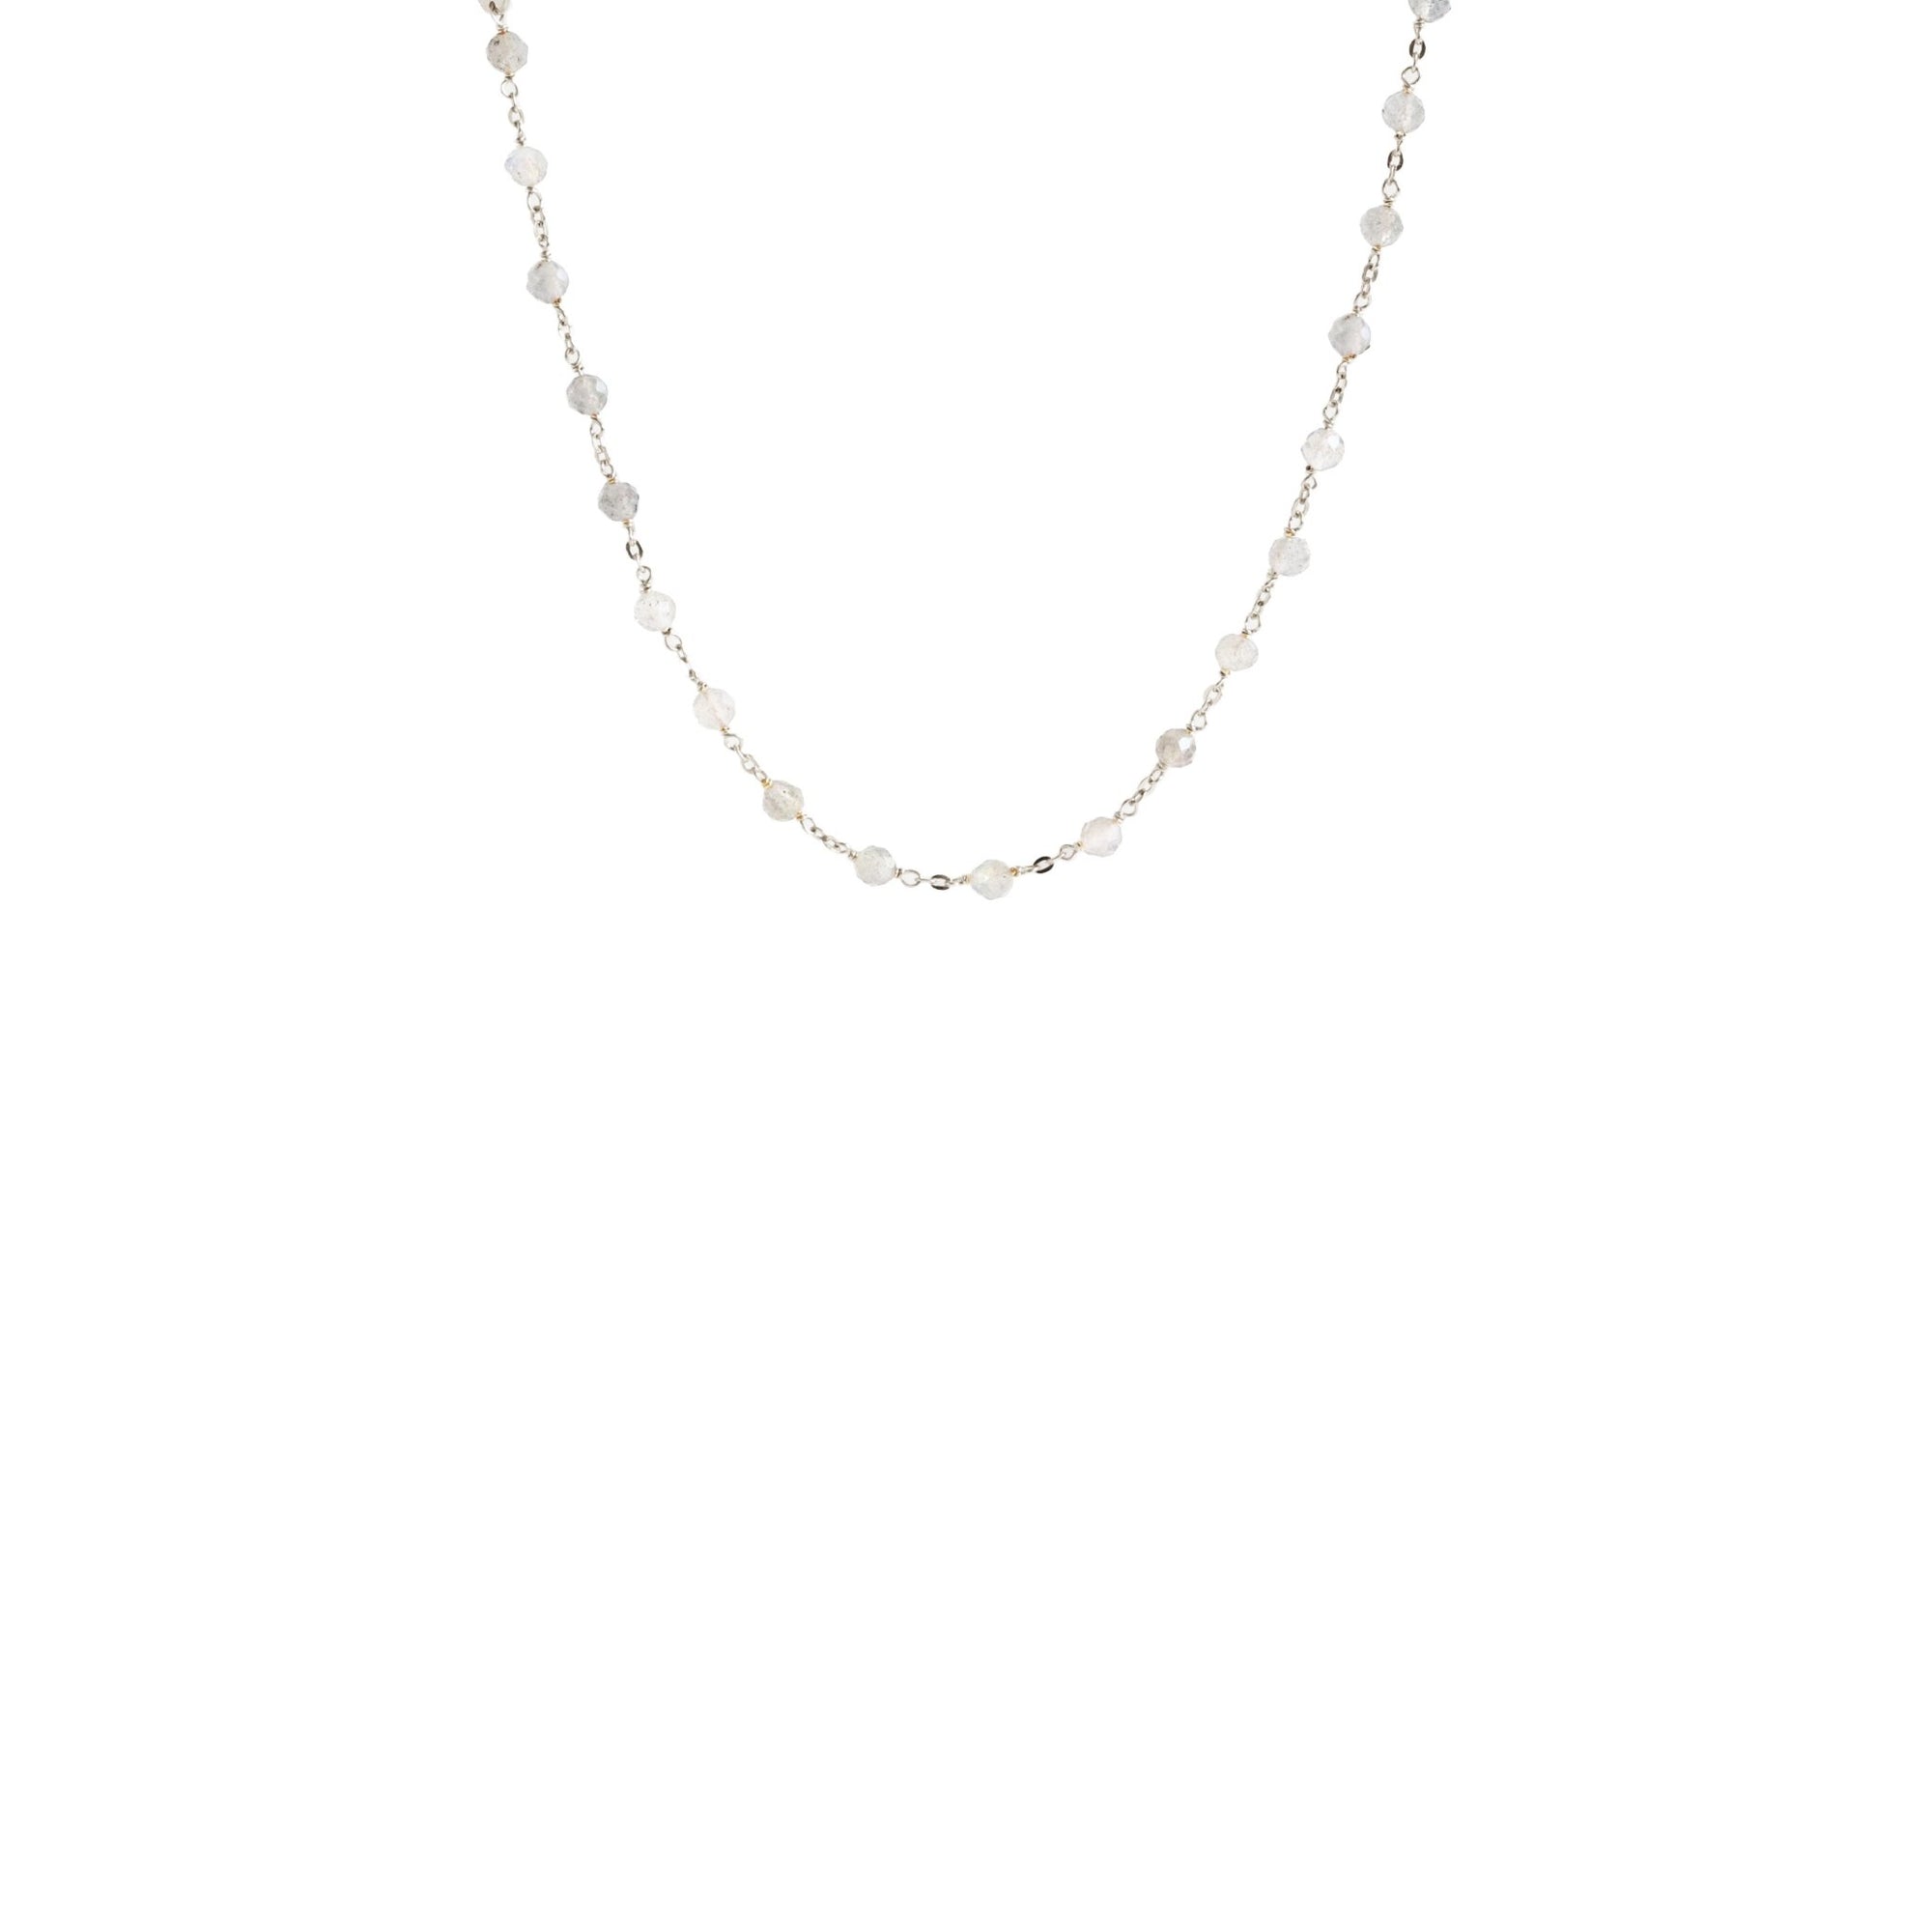 ICONIC SHORT BEADED NECKLACE - RAINBOW MOONSTONE & SILVER 16-20" - SO PRETTY CARA COTTER